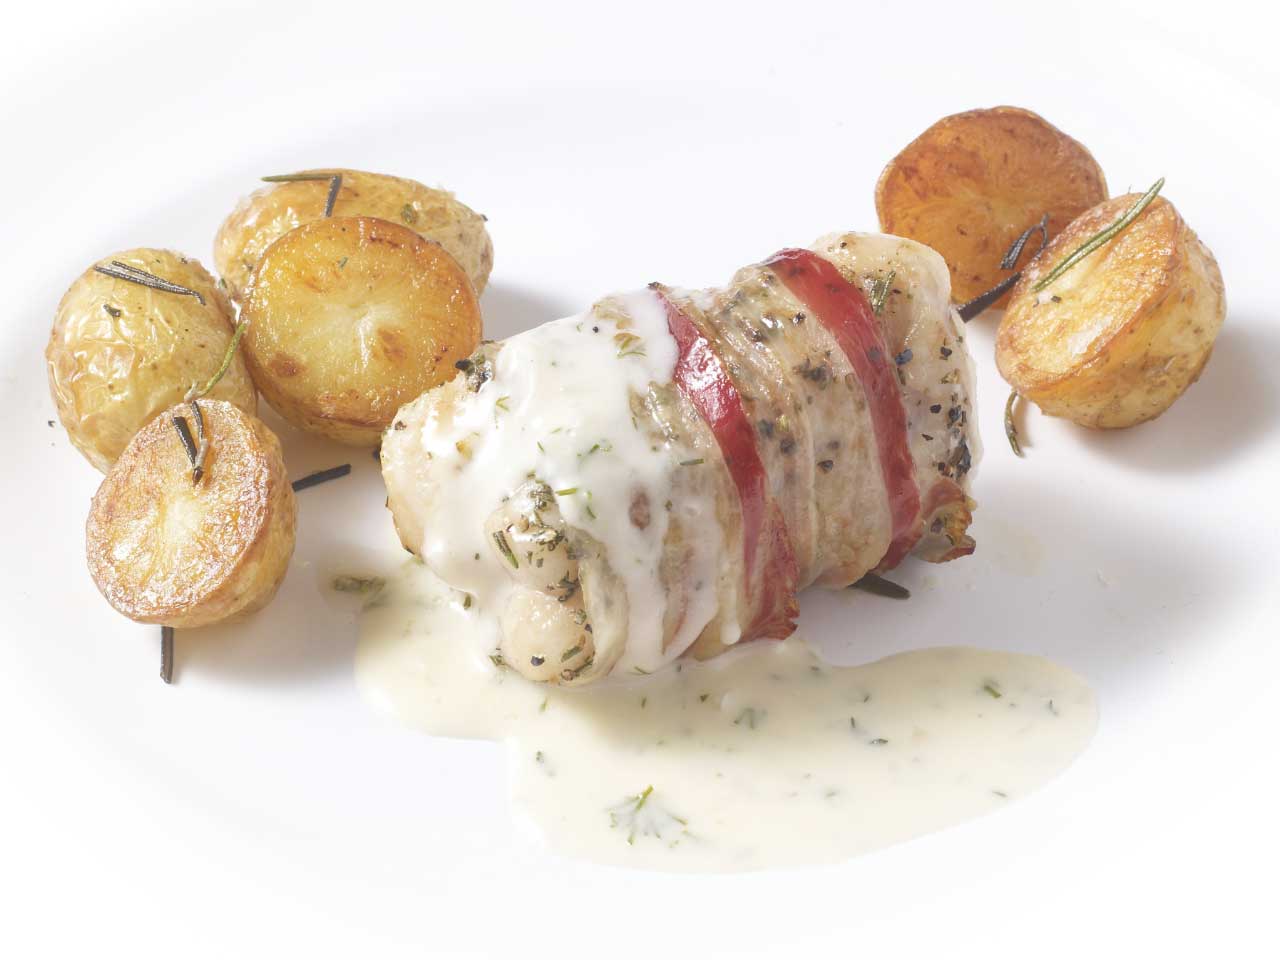 Herby monkfish